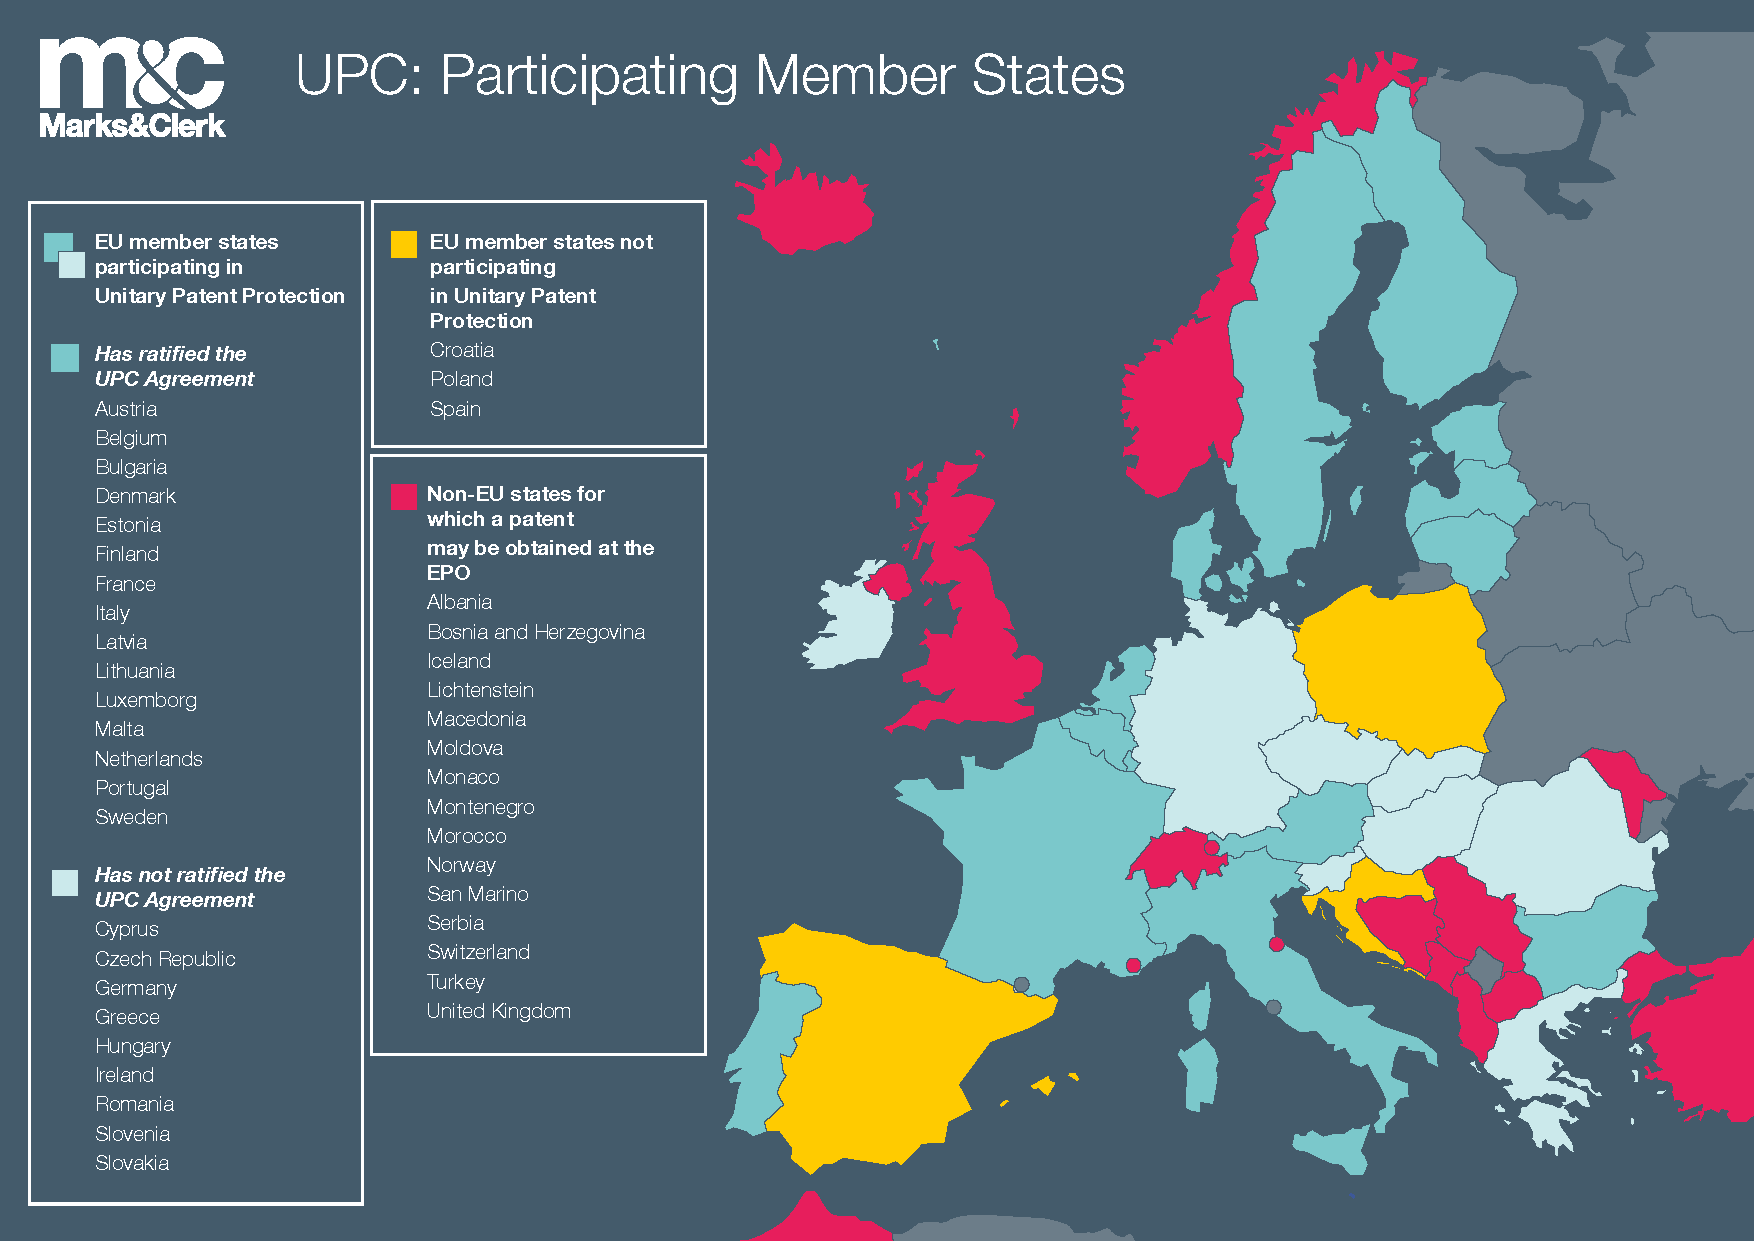 Map of UPC participating member states